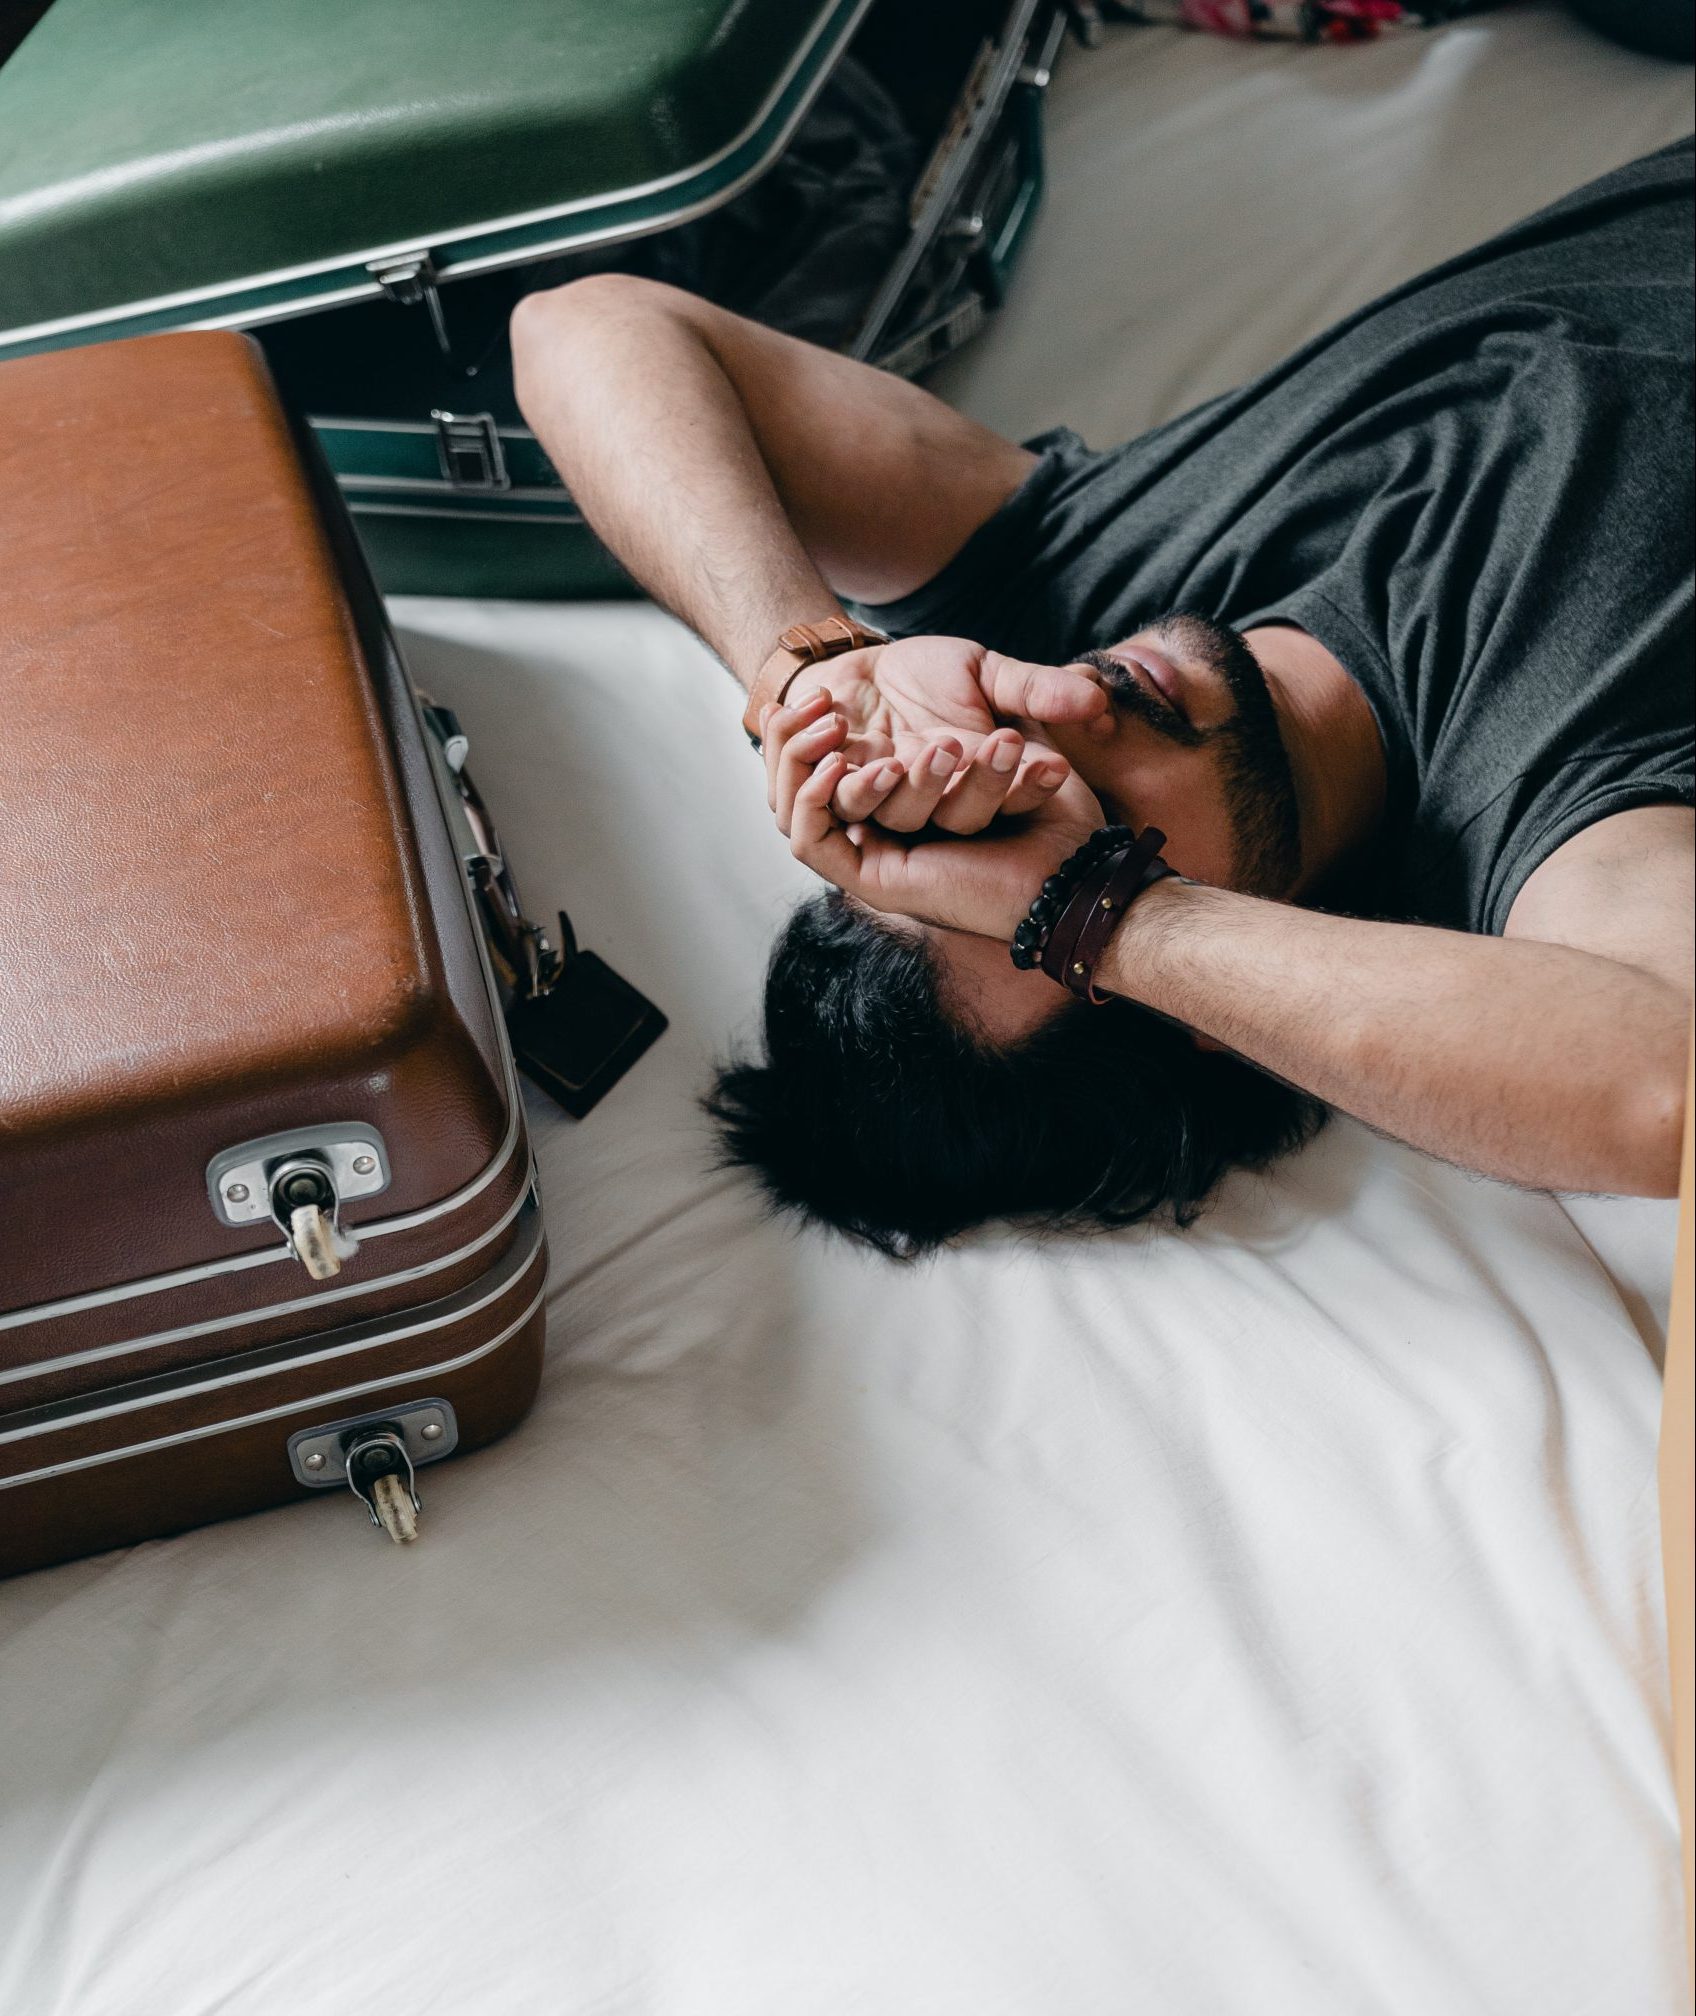 The importance of getting enough sleep for musicians